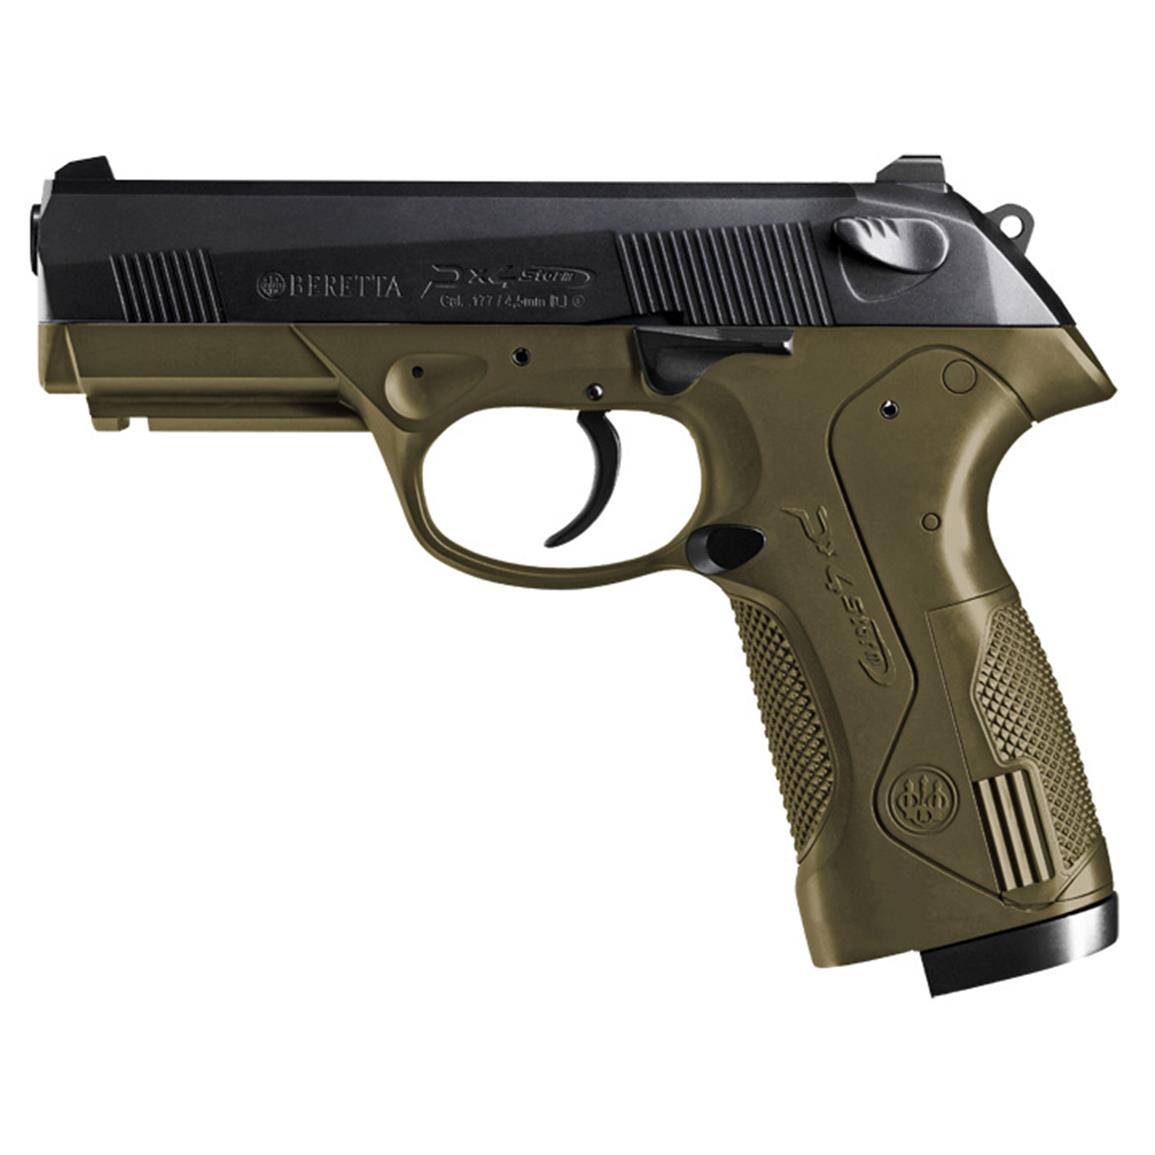 Px4 Beretta Review